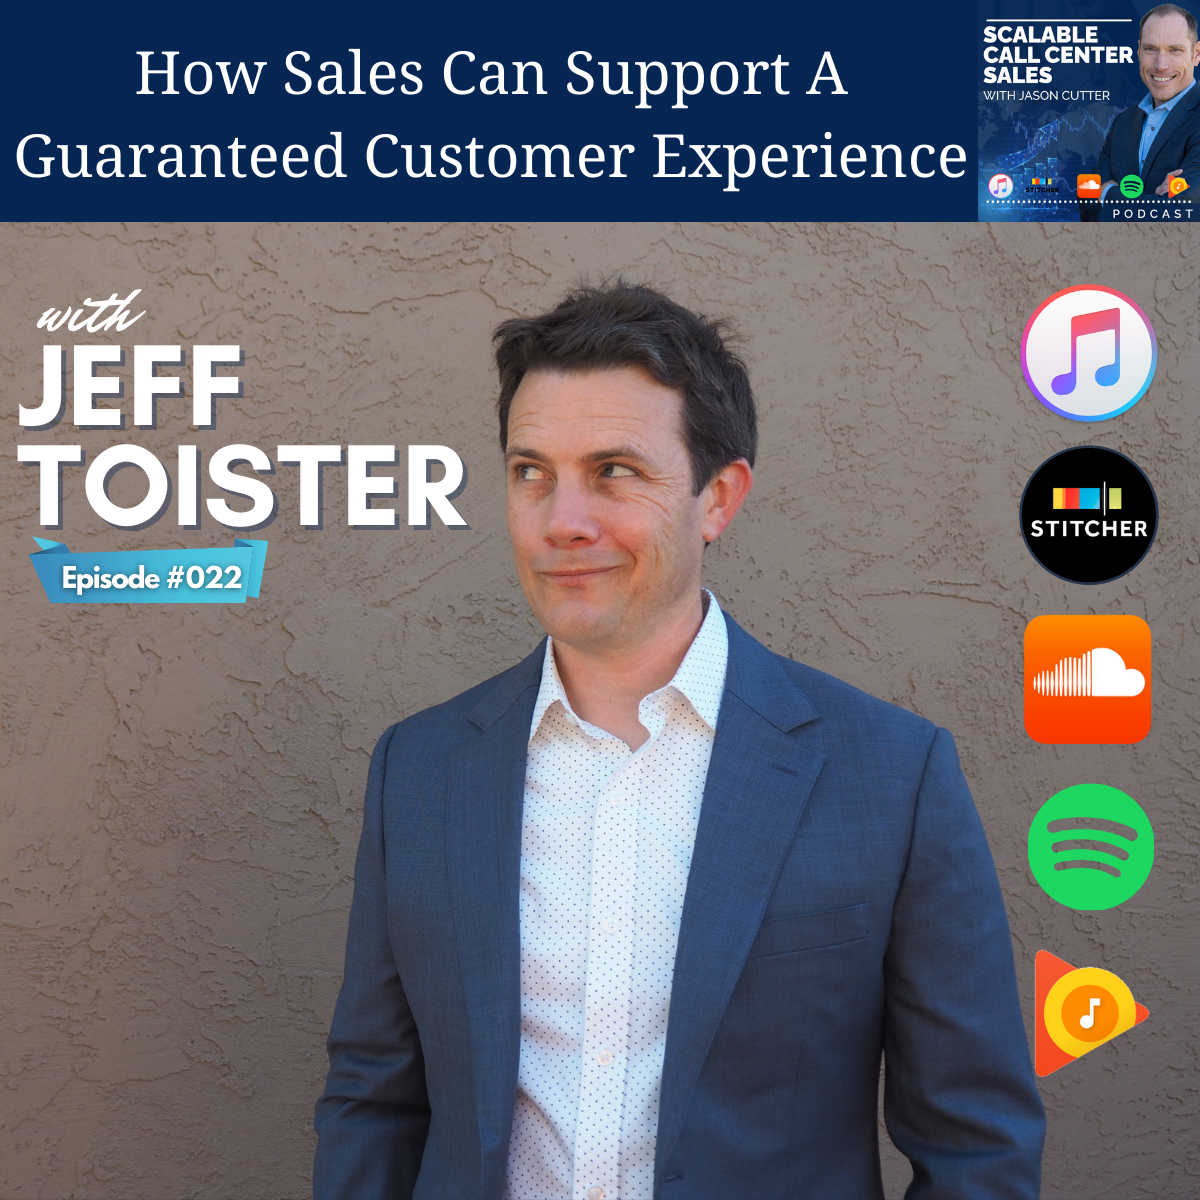 [022] How Sales Can Support A Guaranteed Customer Experience, with Jeff Toister